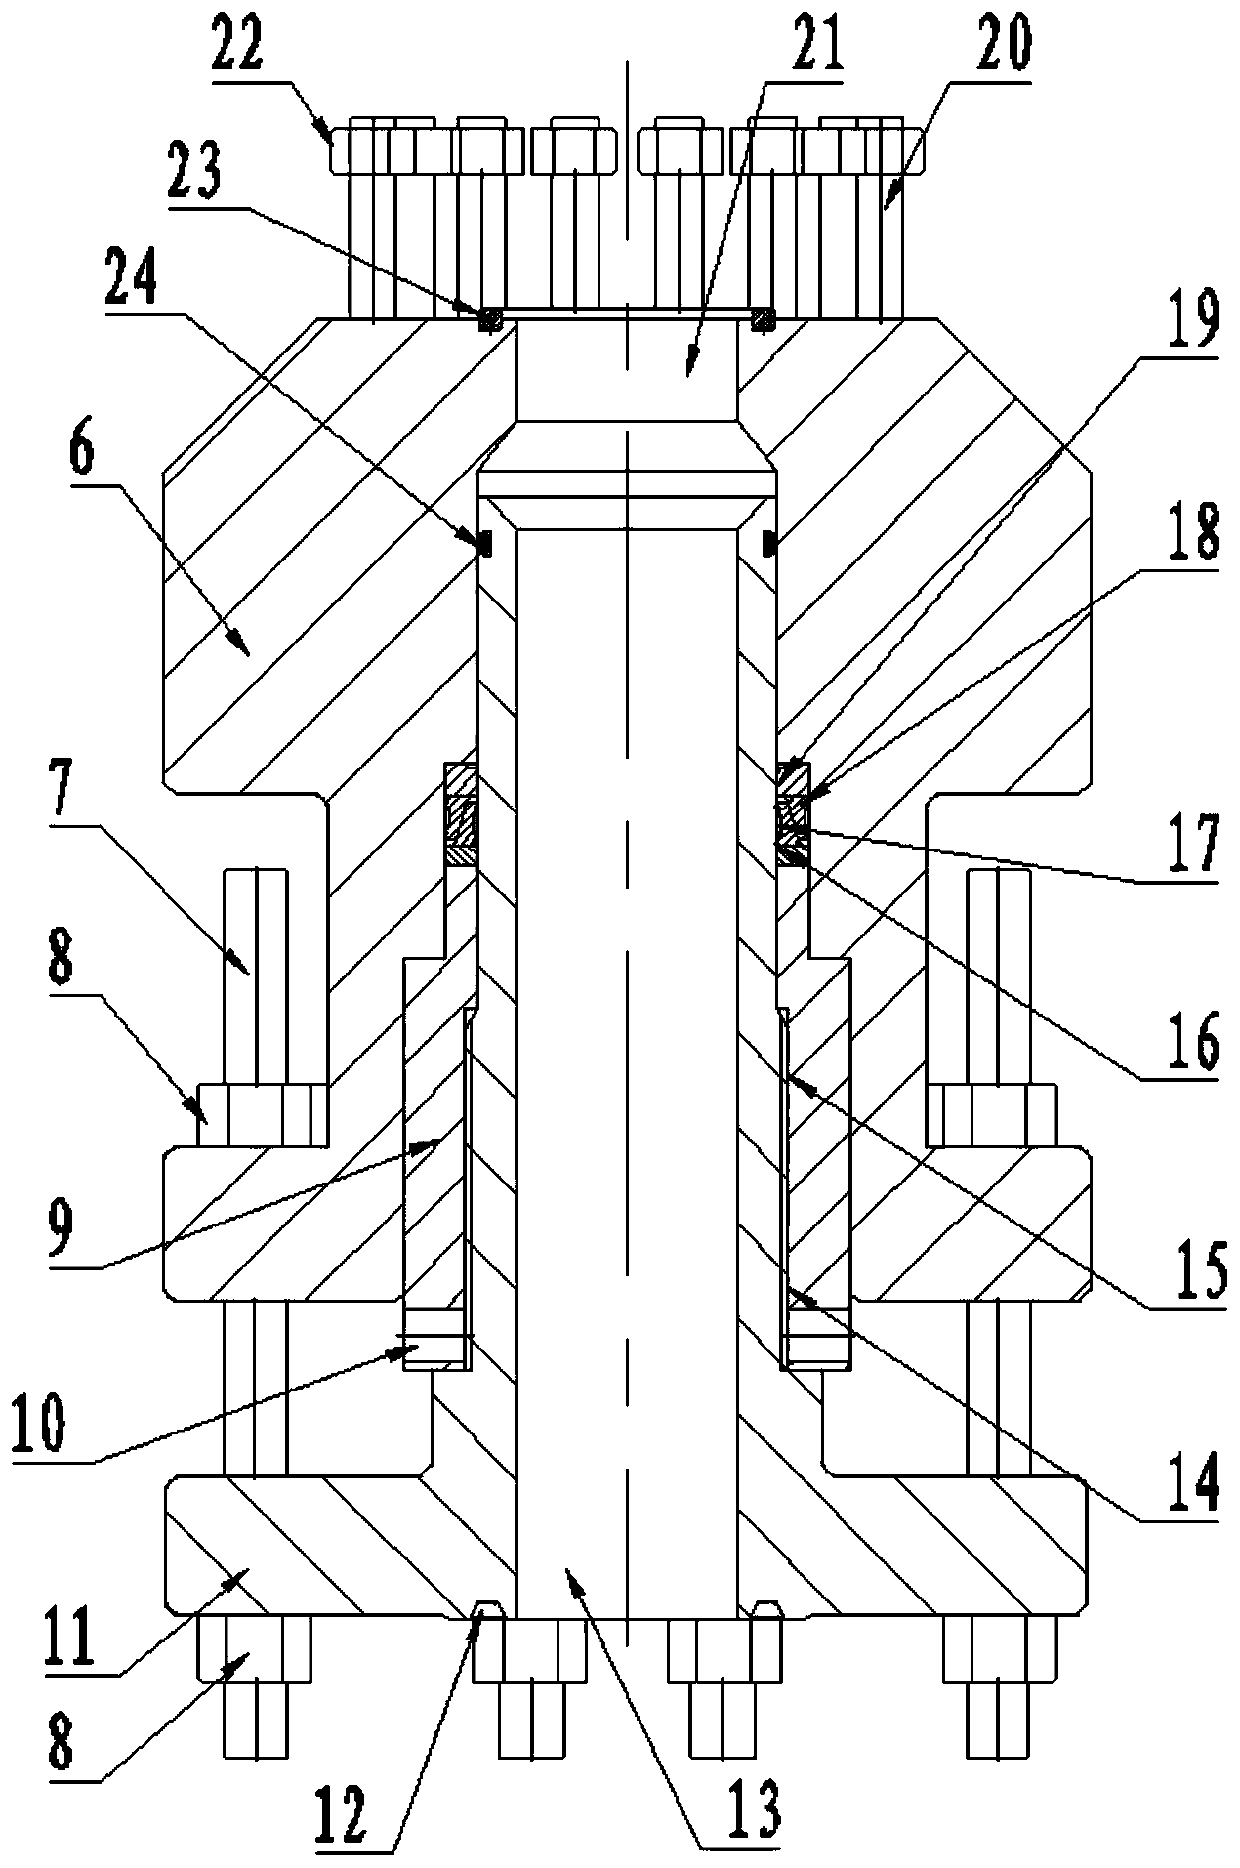 Adjustable connecting device suitable for manifold connection